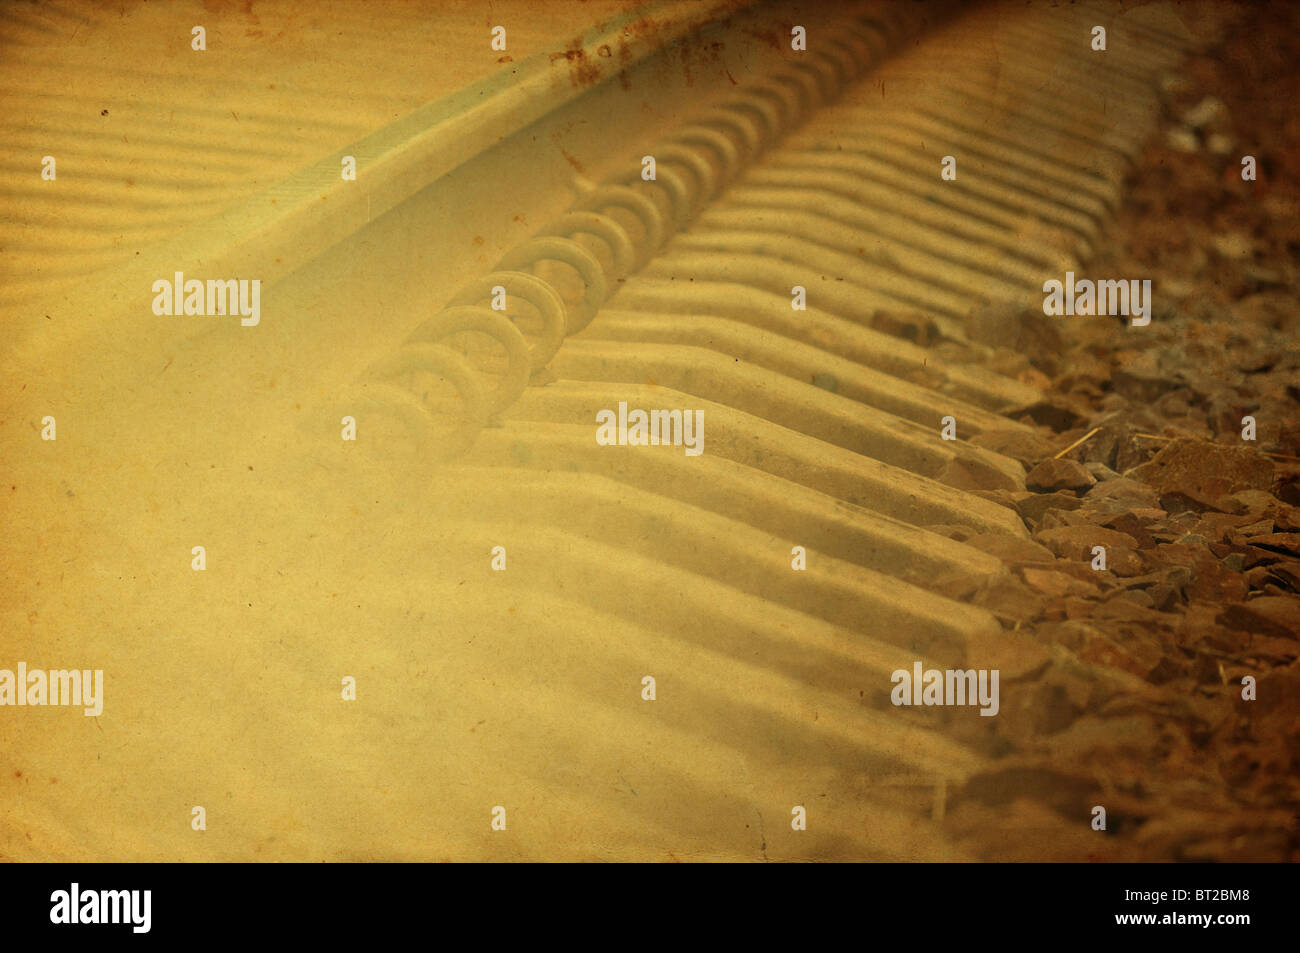 Grunge railway background with old paper texture in sepia style Stock Photo